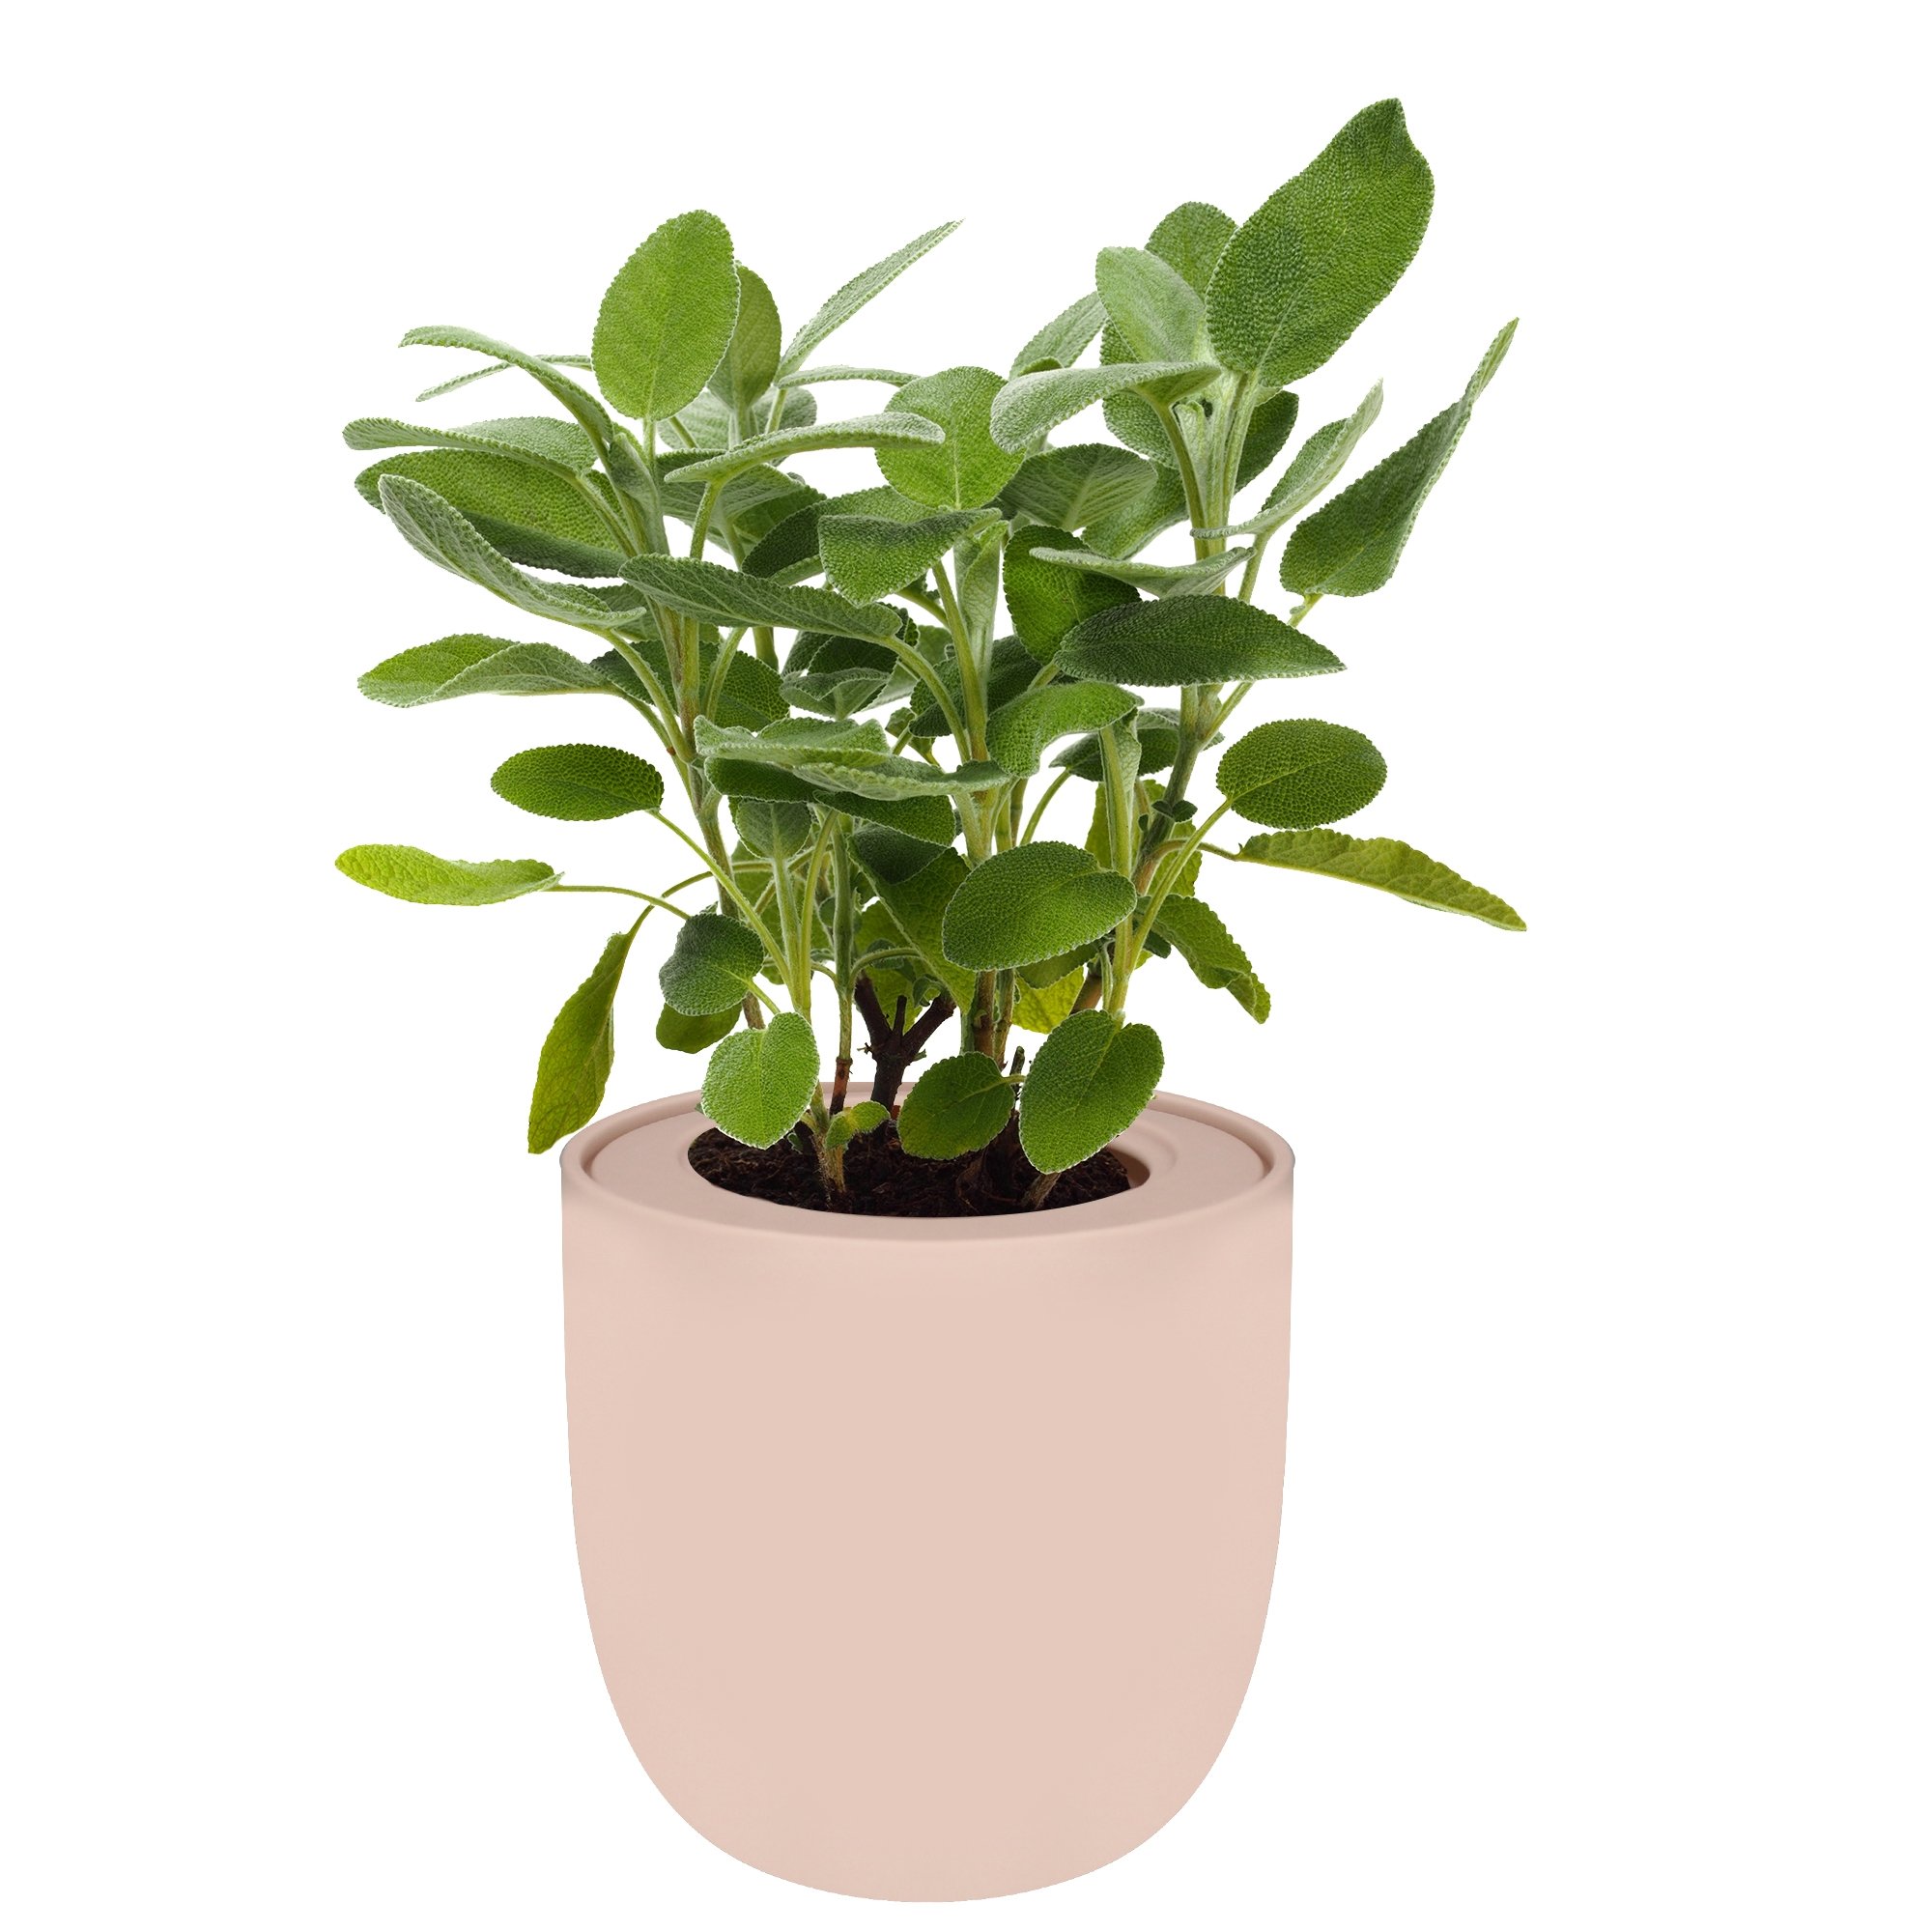 Hydroponic Herb Growing Kit With Pink Ceramic Pot and Organic Seeds (Sage)